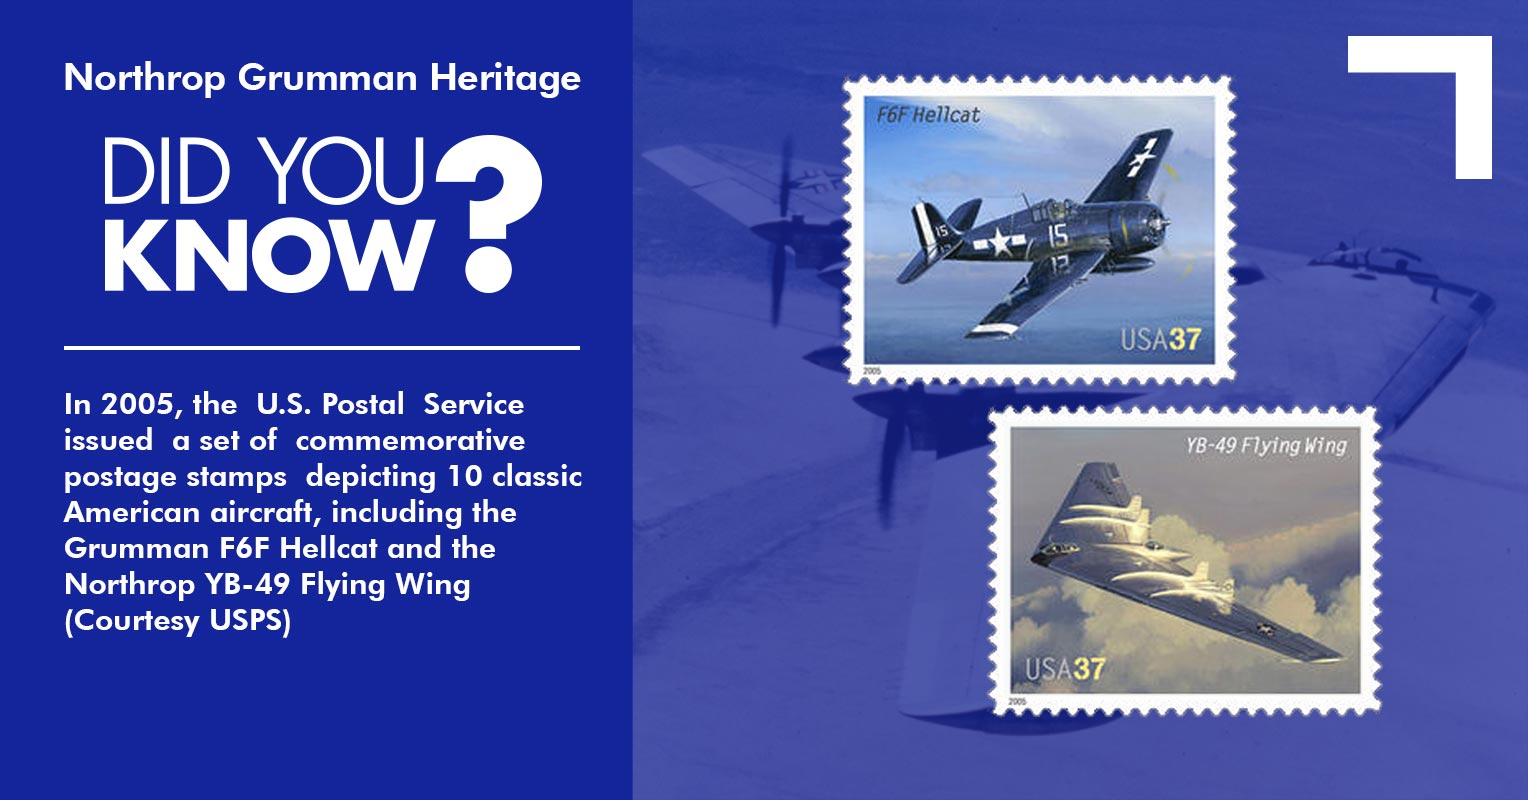 Postage stamps of two airplanes